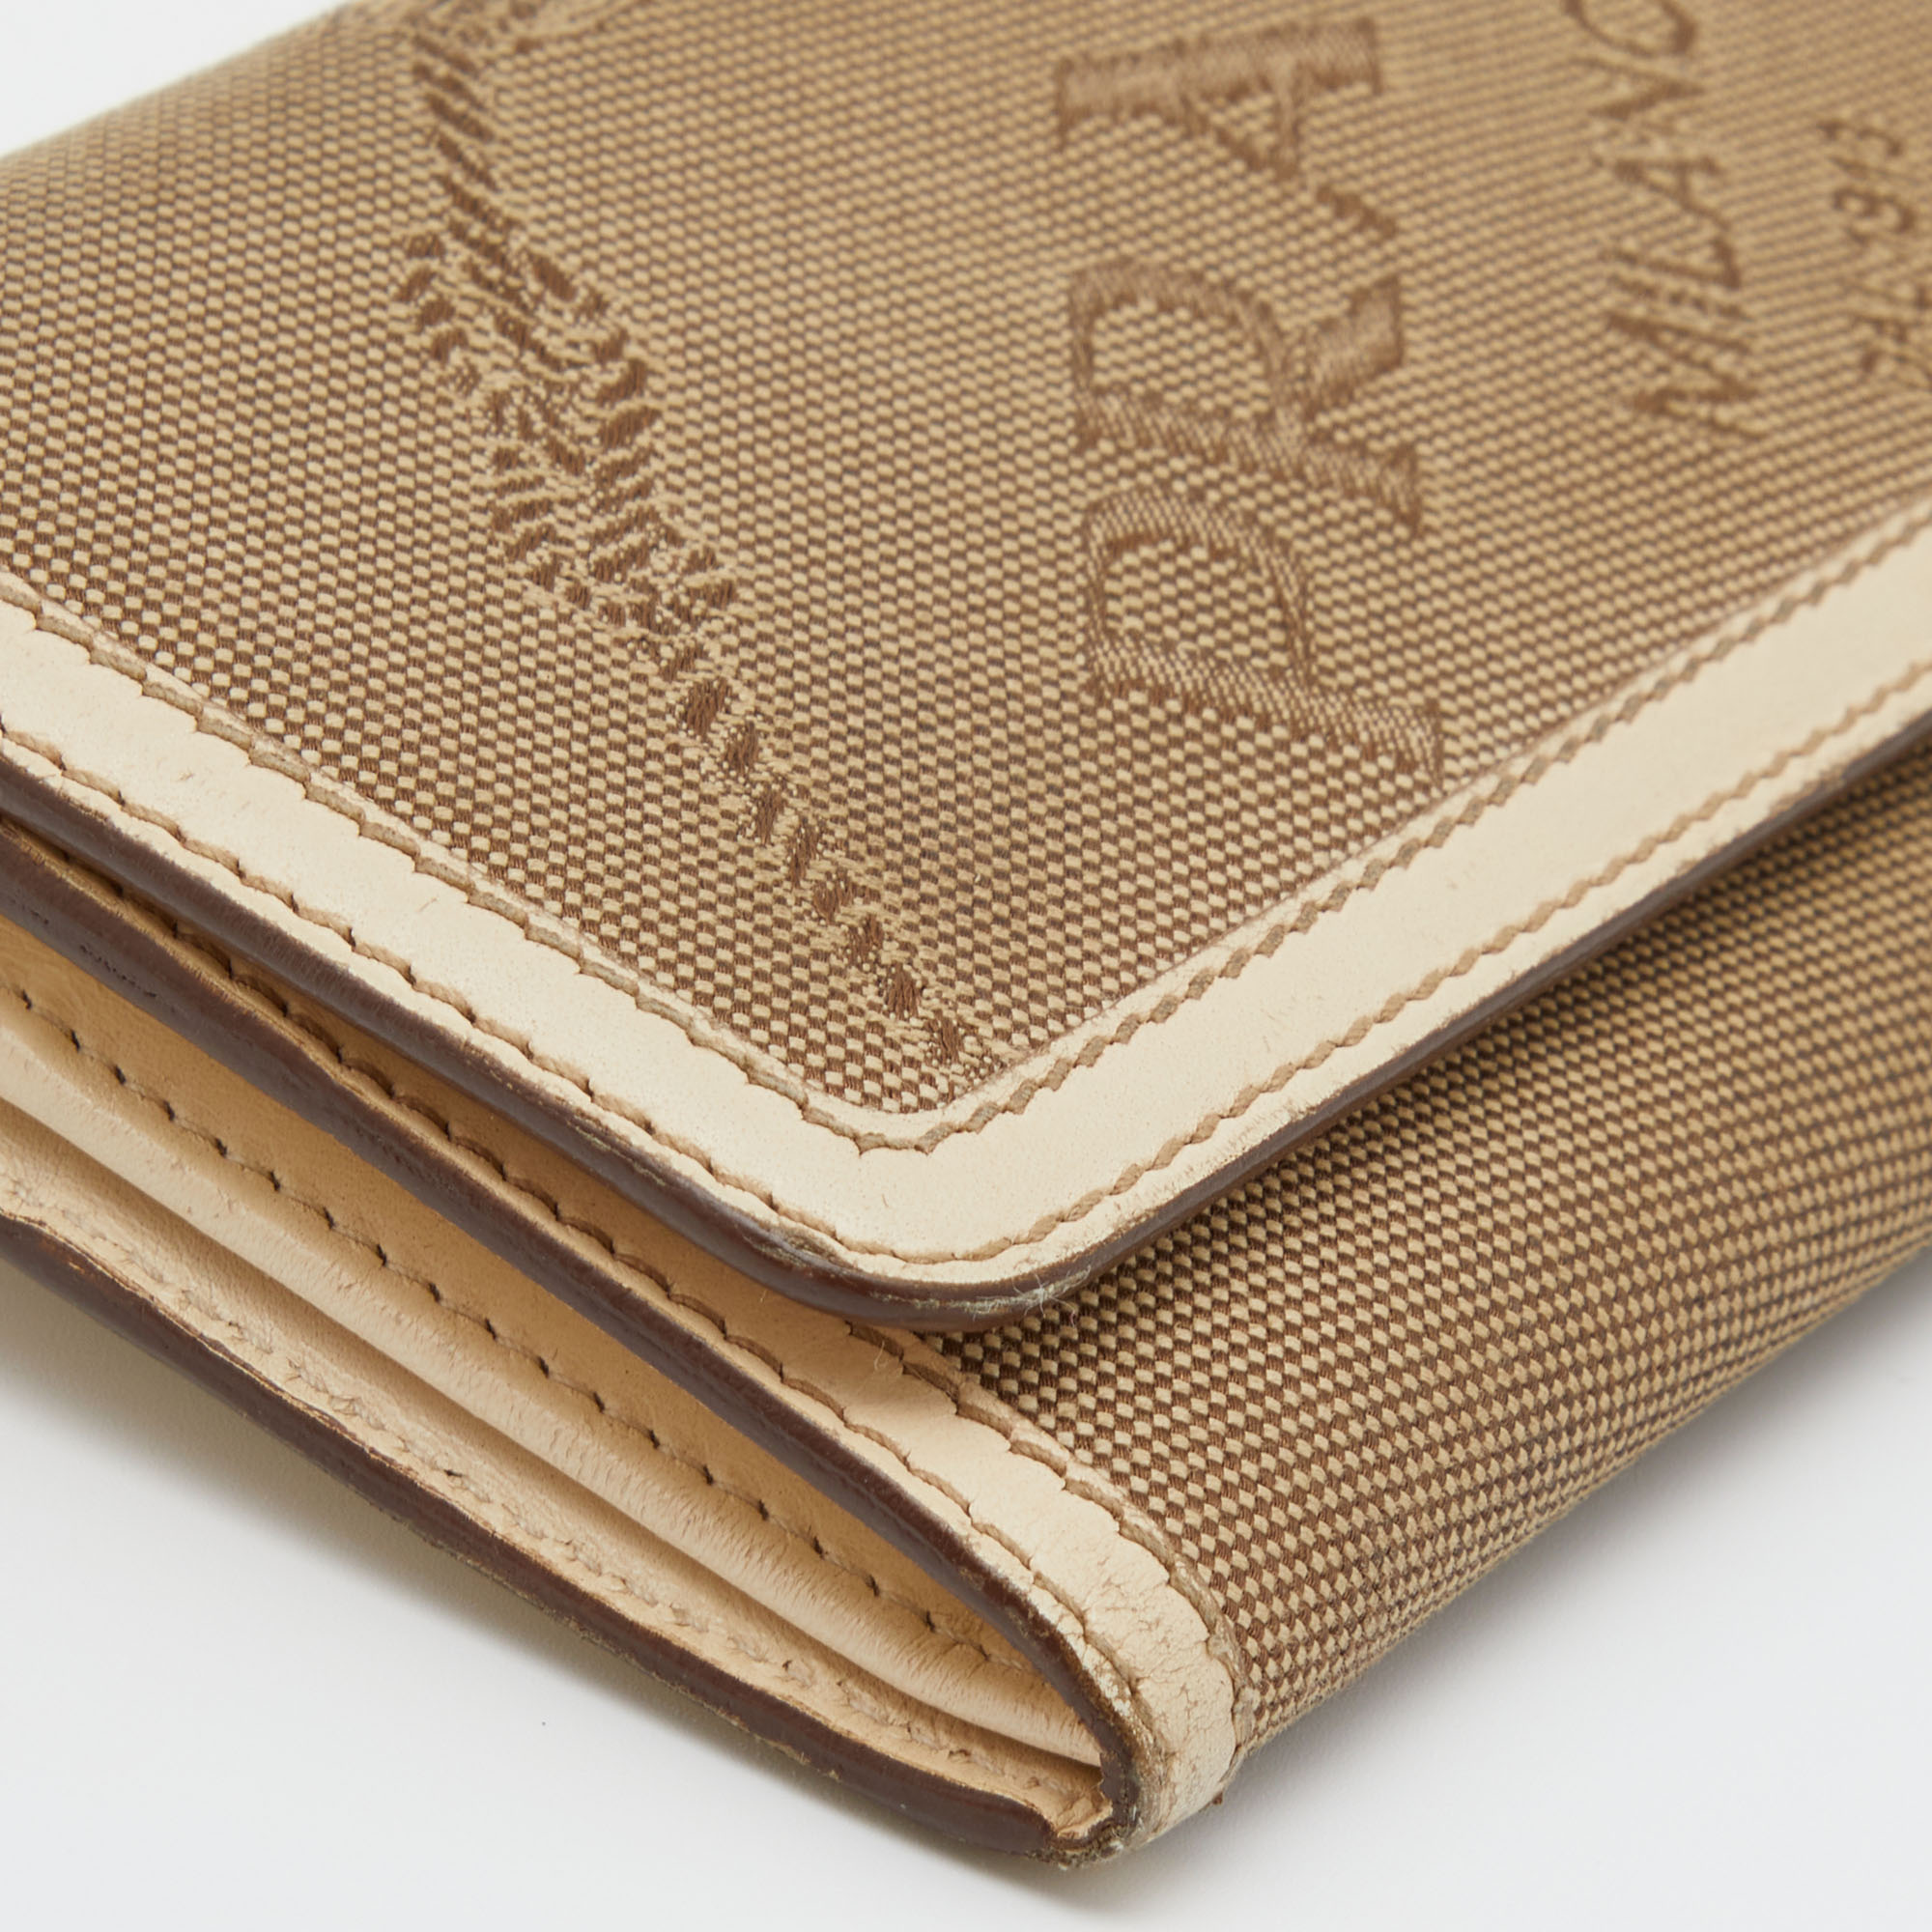 Prada Beige Jacquard Logo Canvas And Leather Flap Continental Wallet